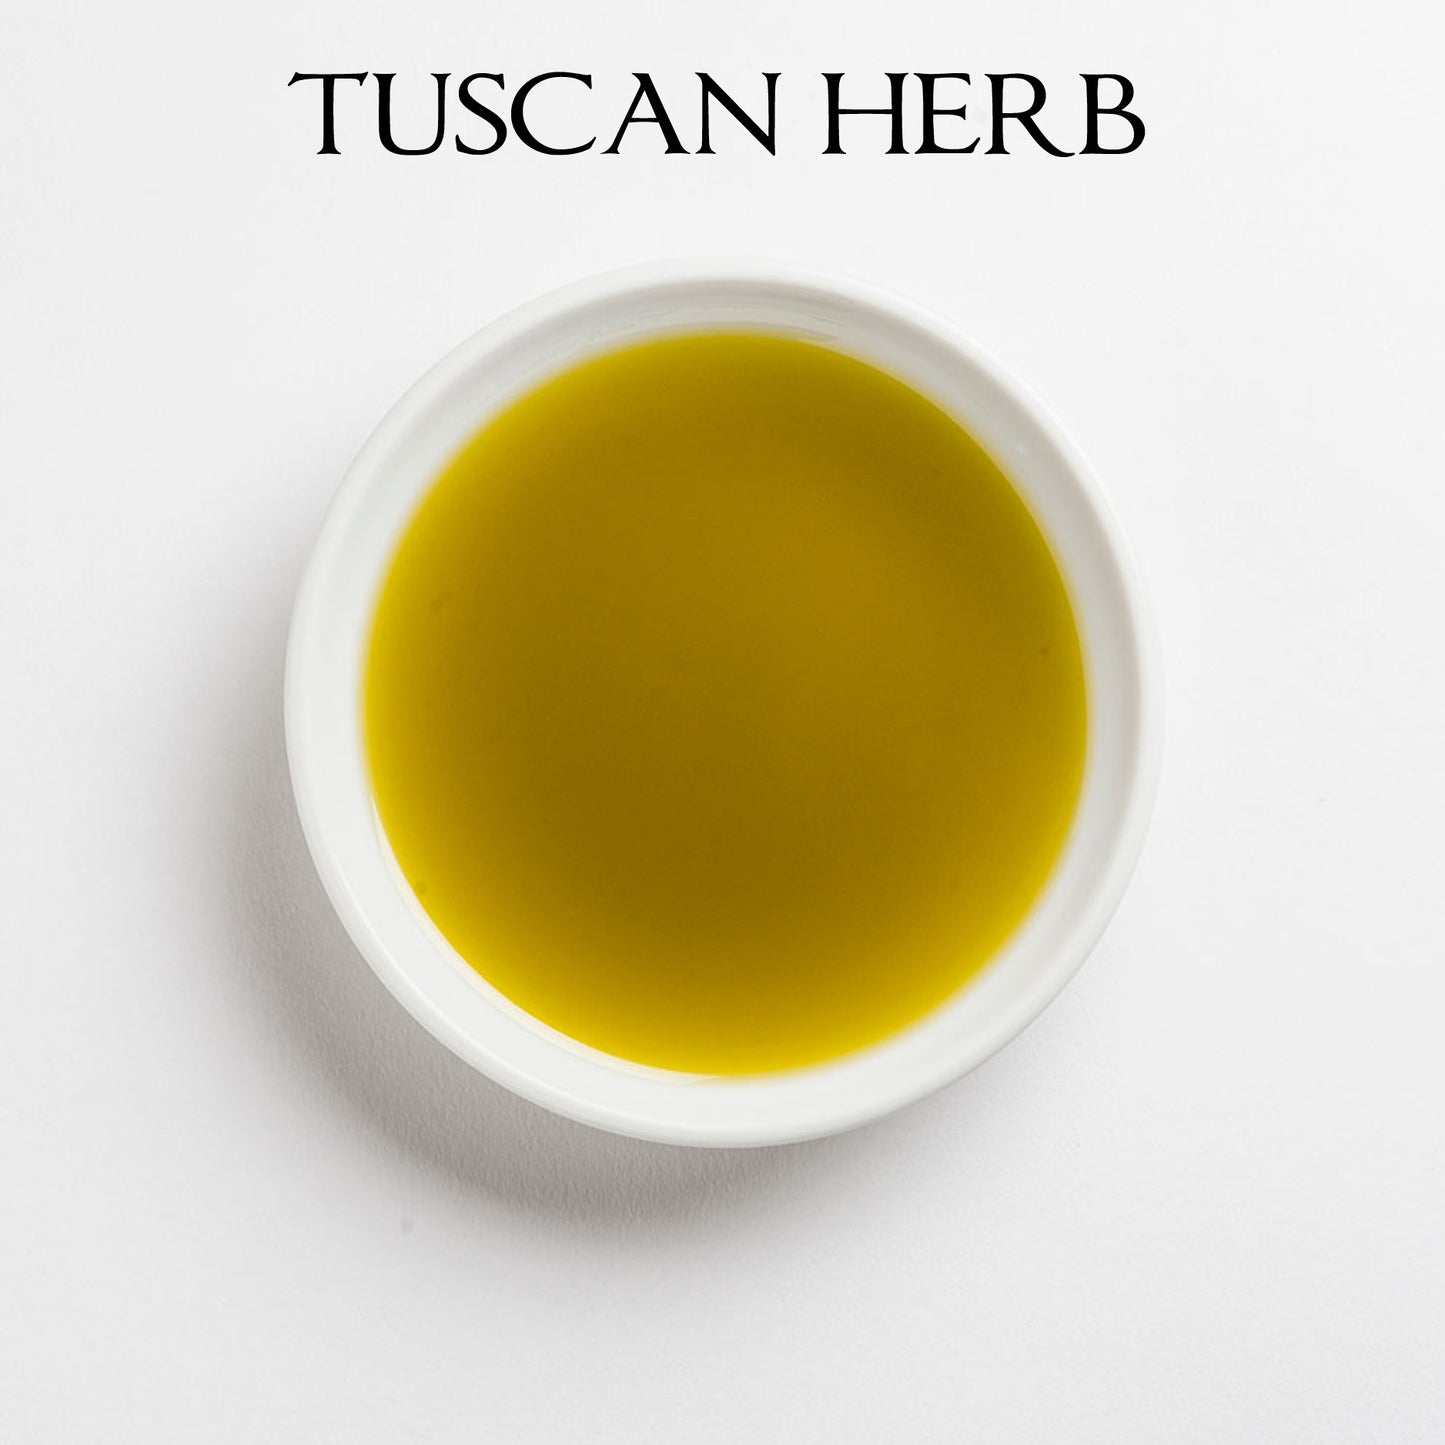 TUSCAN HERB Infused Olive Oil - Spain/Chile